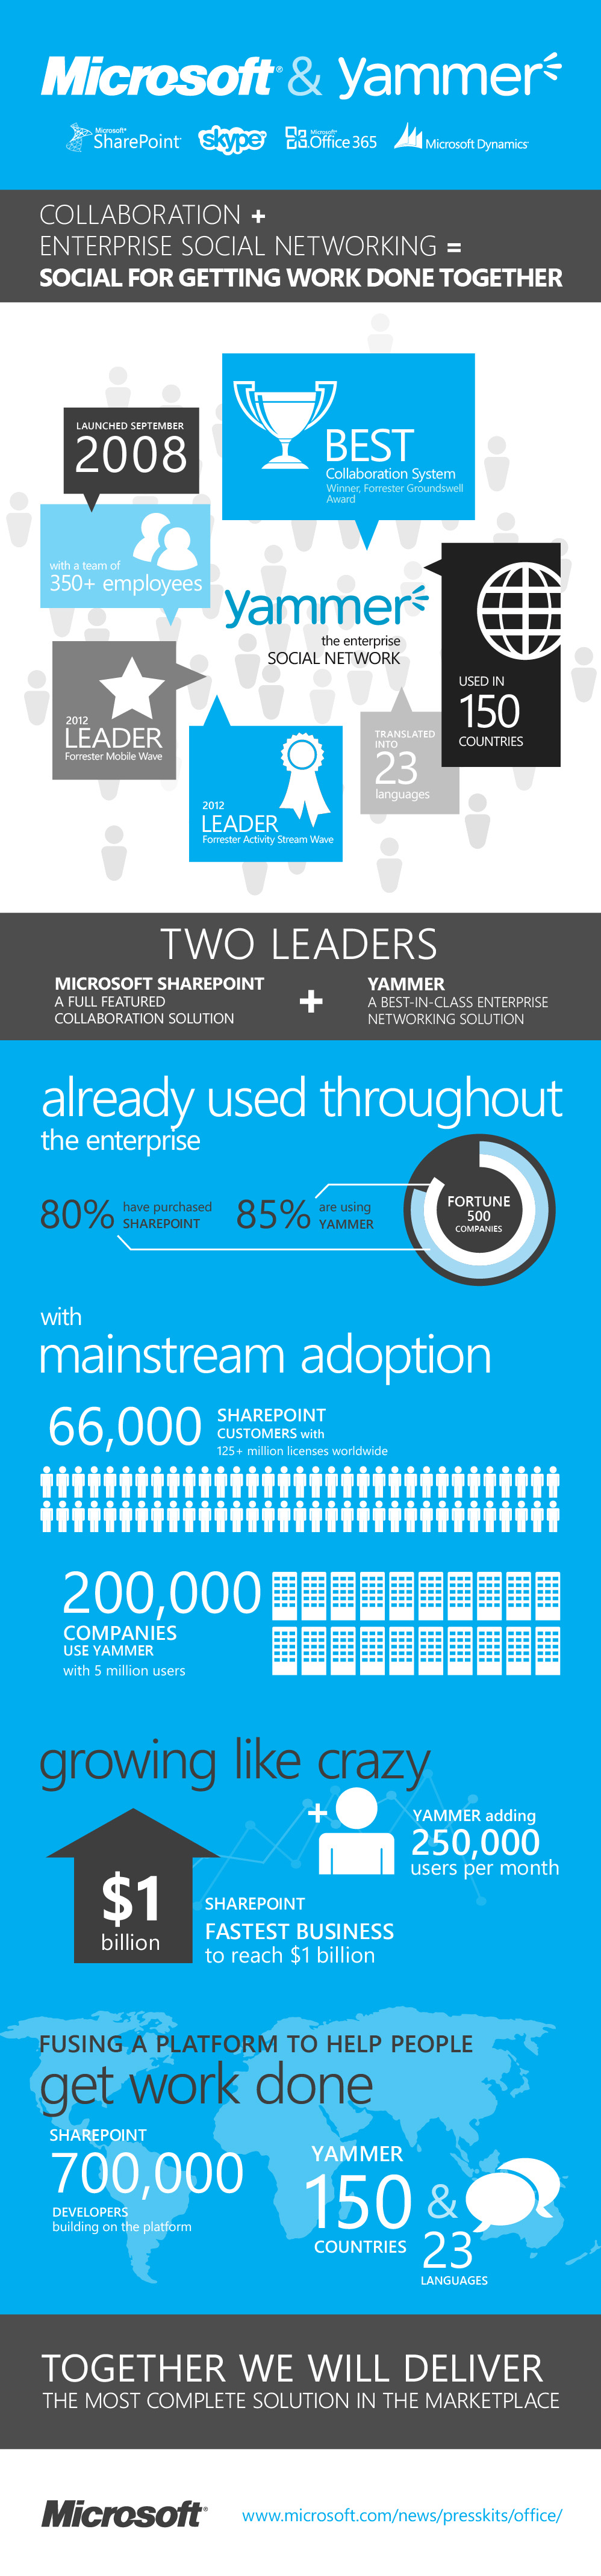 Infographic Provides Background And Data About Yammer